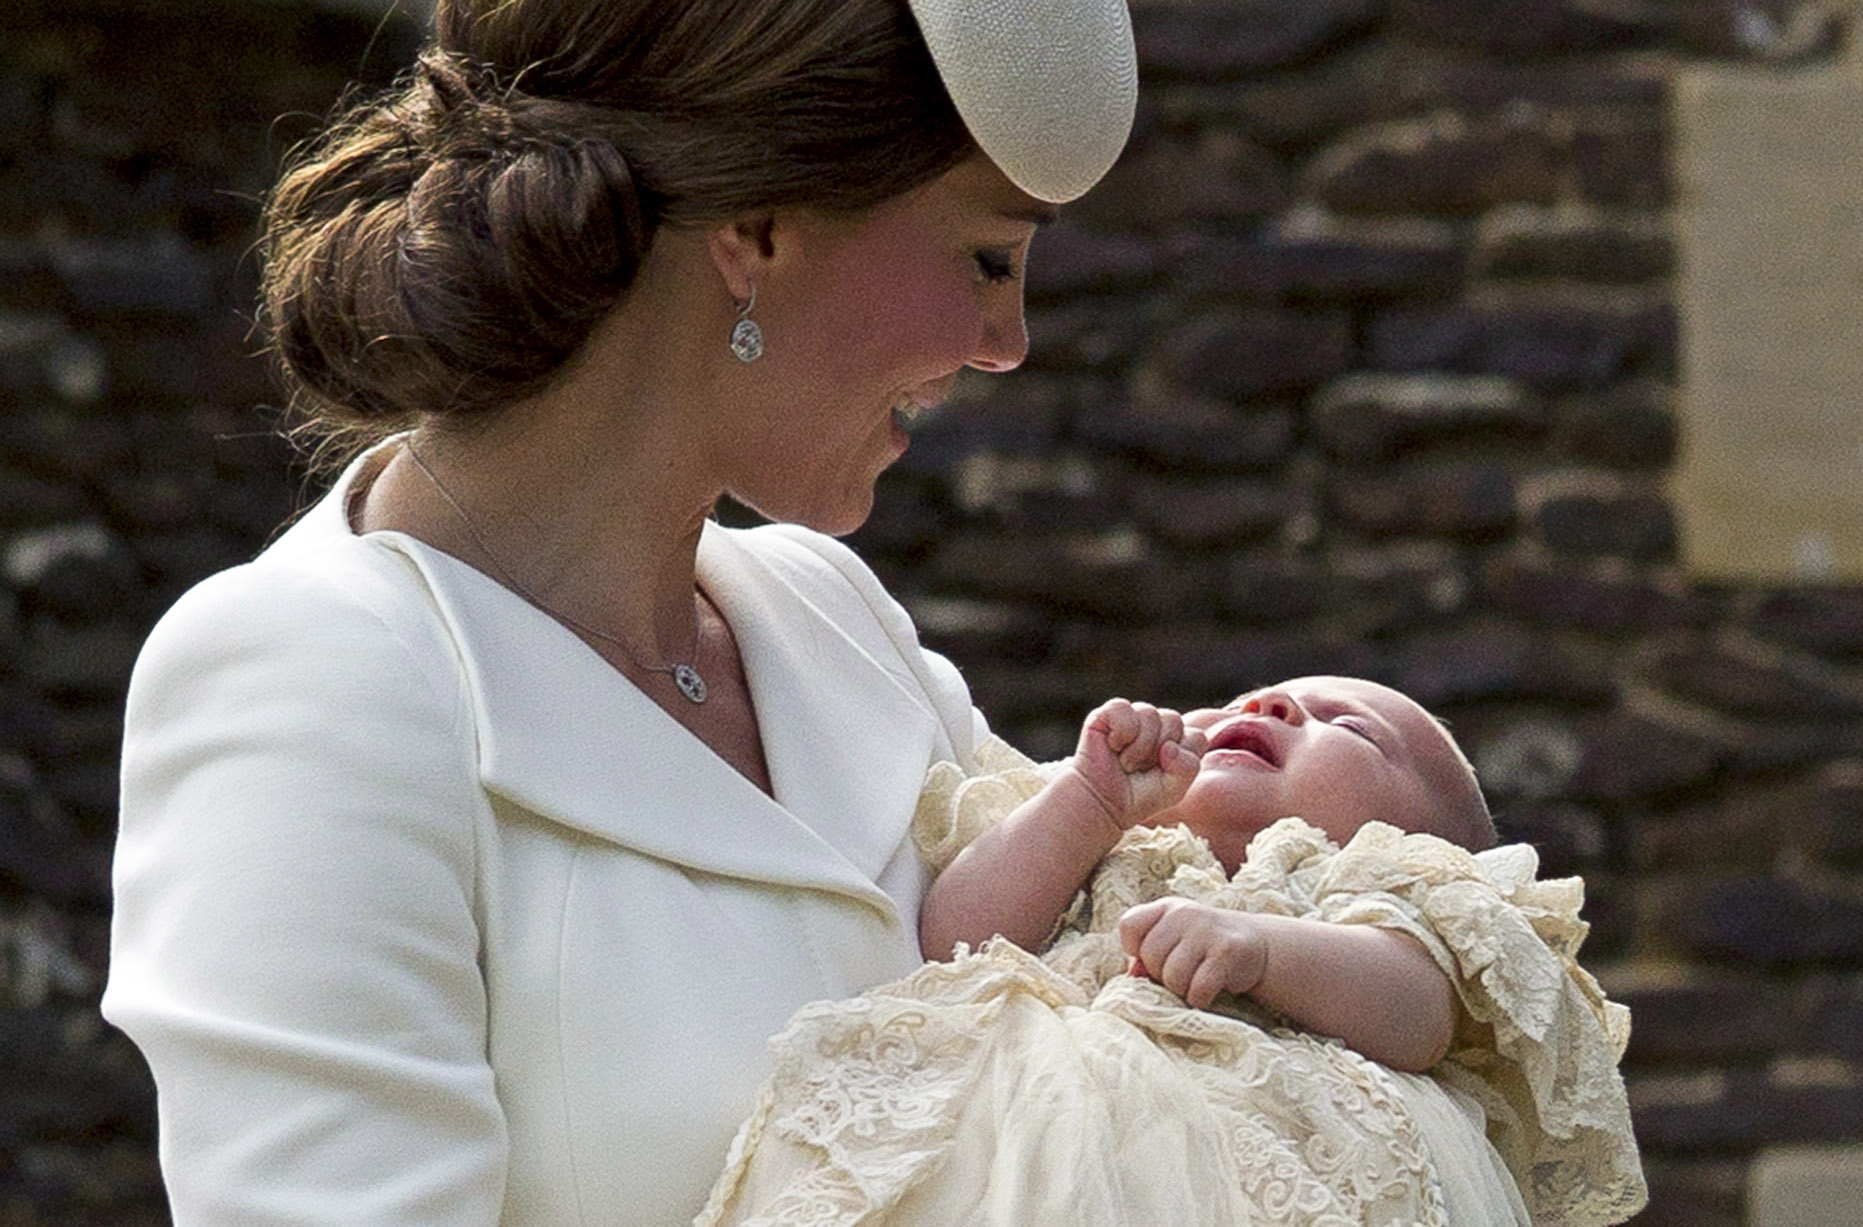 Catherine, Duchess of Cambridge, carries Princess Charlotte of Cambridge as they arrive at the Church of St Mary Magdalene on the Sandringham Estate for the Christening of Princess Charlotte of Cambridge in King's Lynn, England on July 5, 2015.